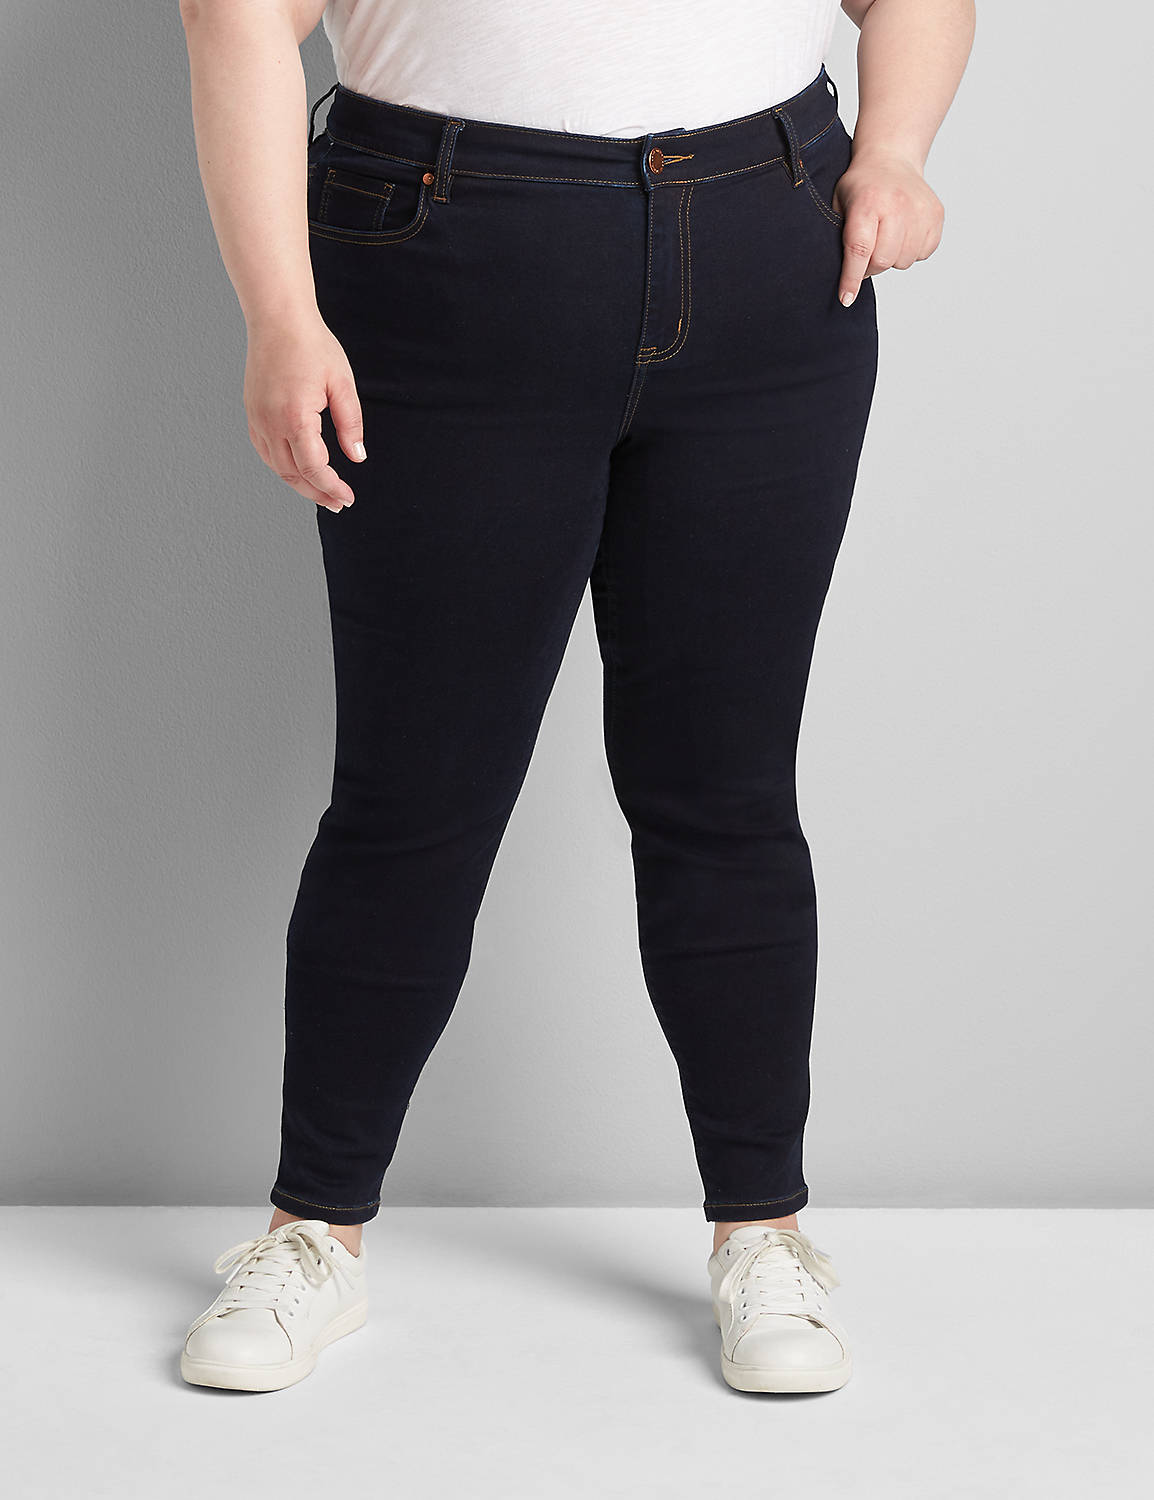 STRAIGHT FIT HIGH RISE SKINNY- RINS Product Image 1